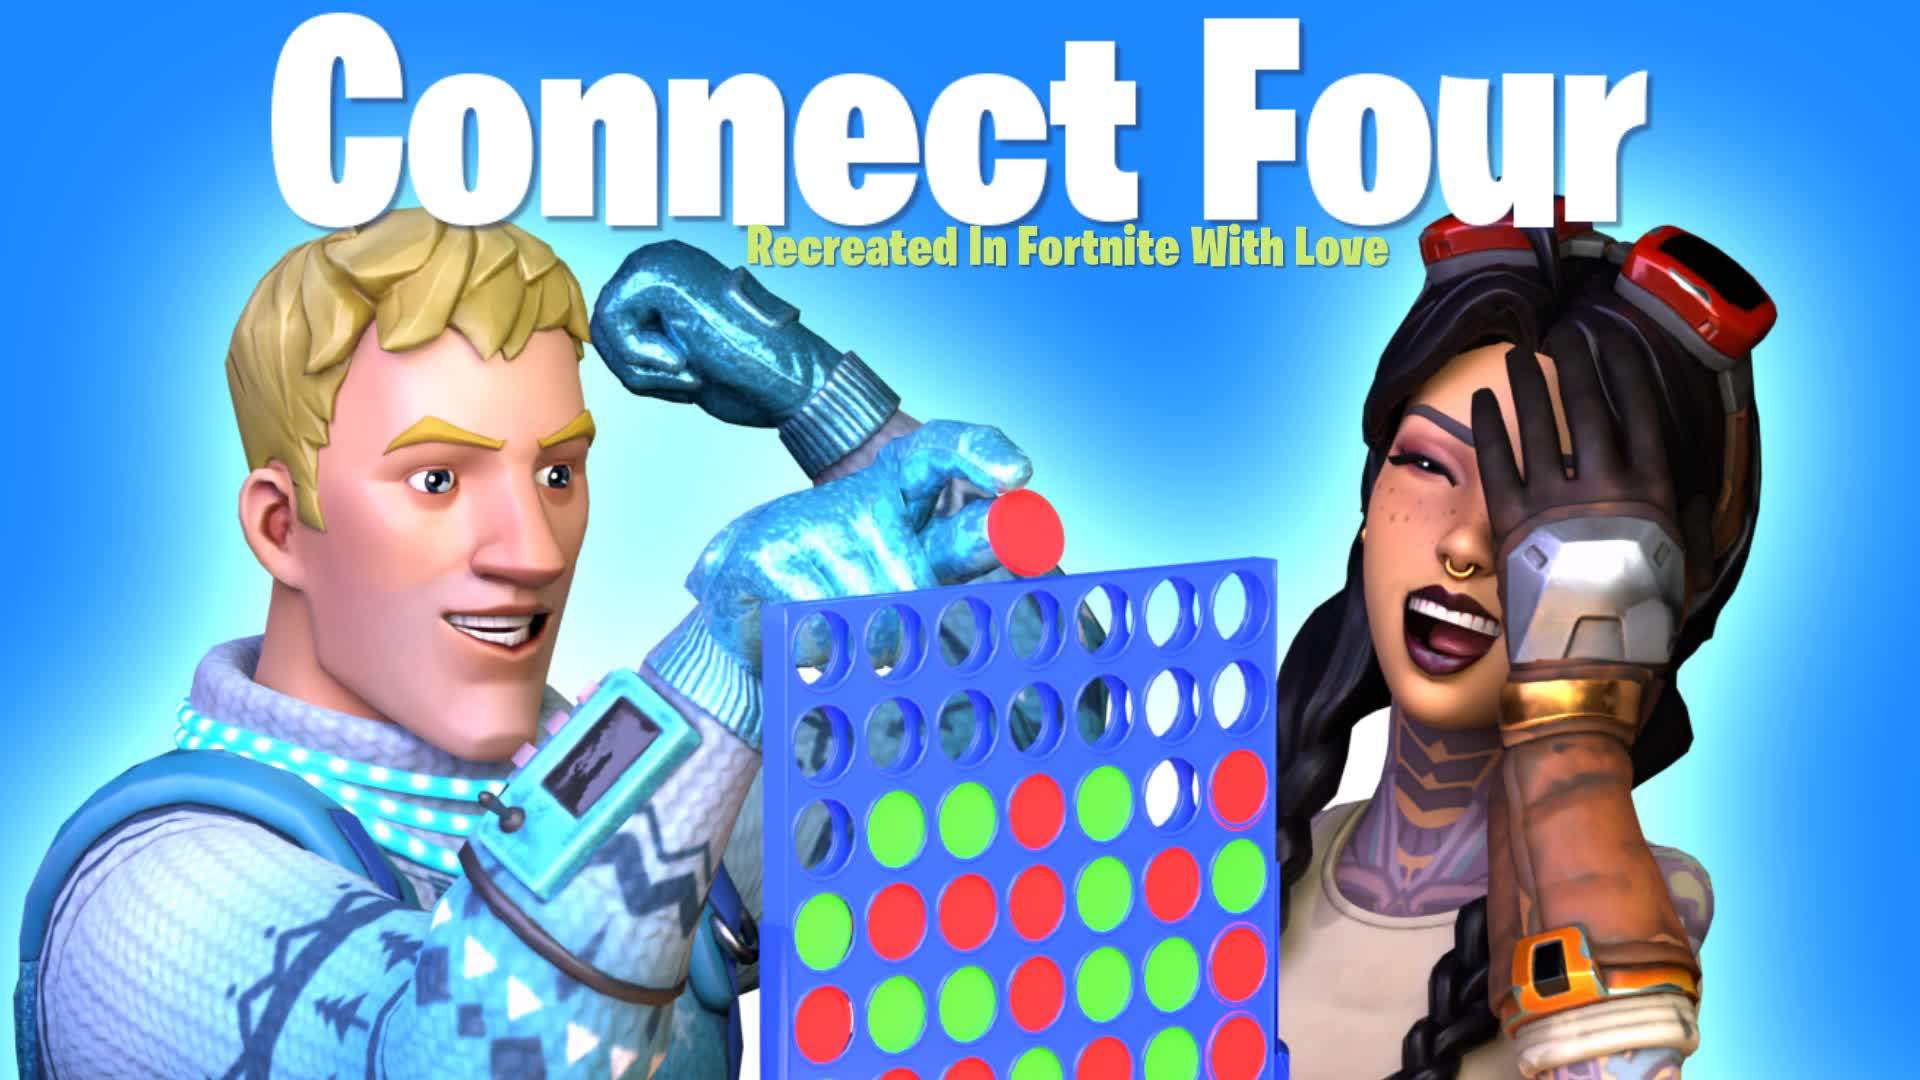 Fortnite Connect four